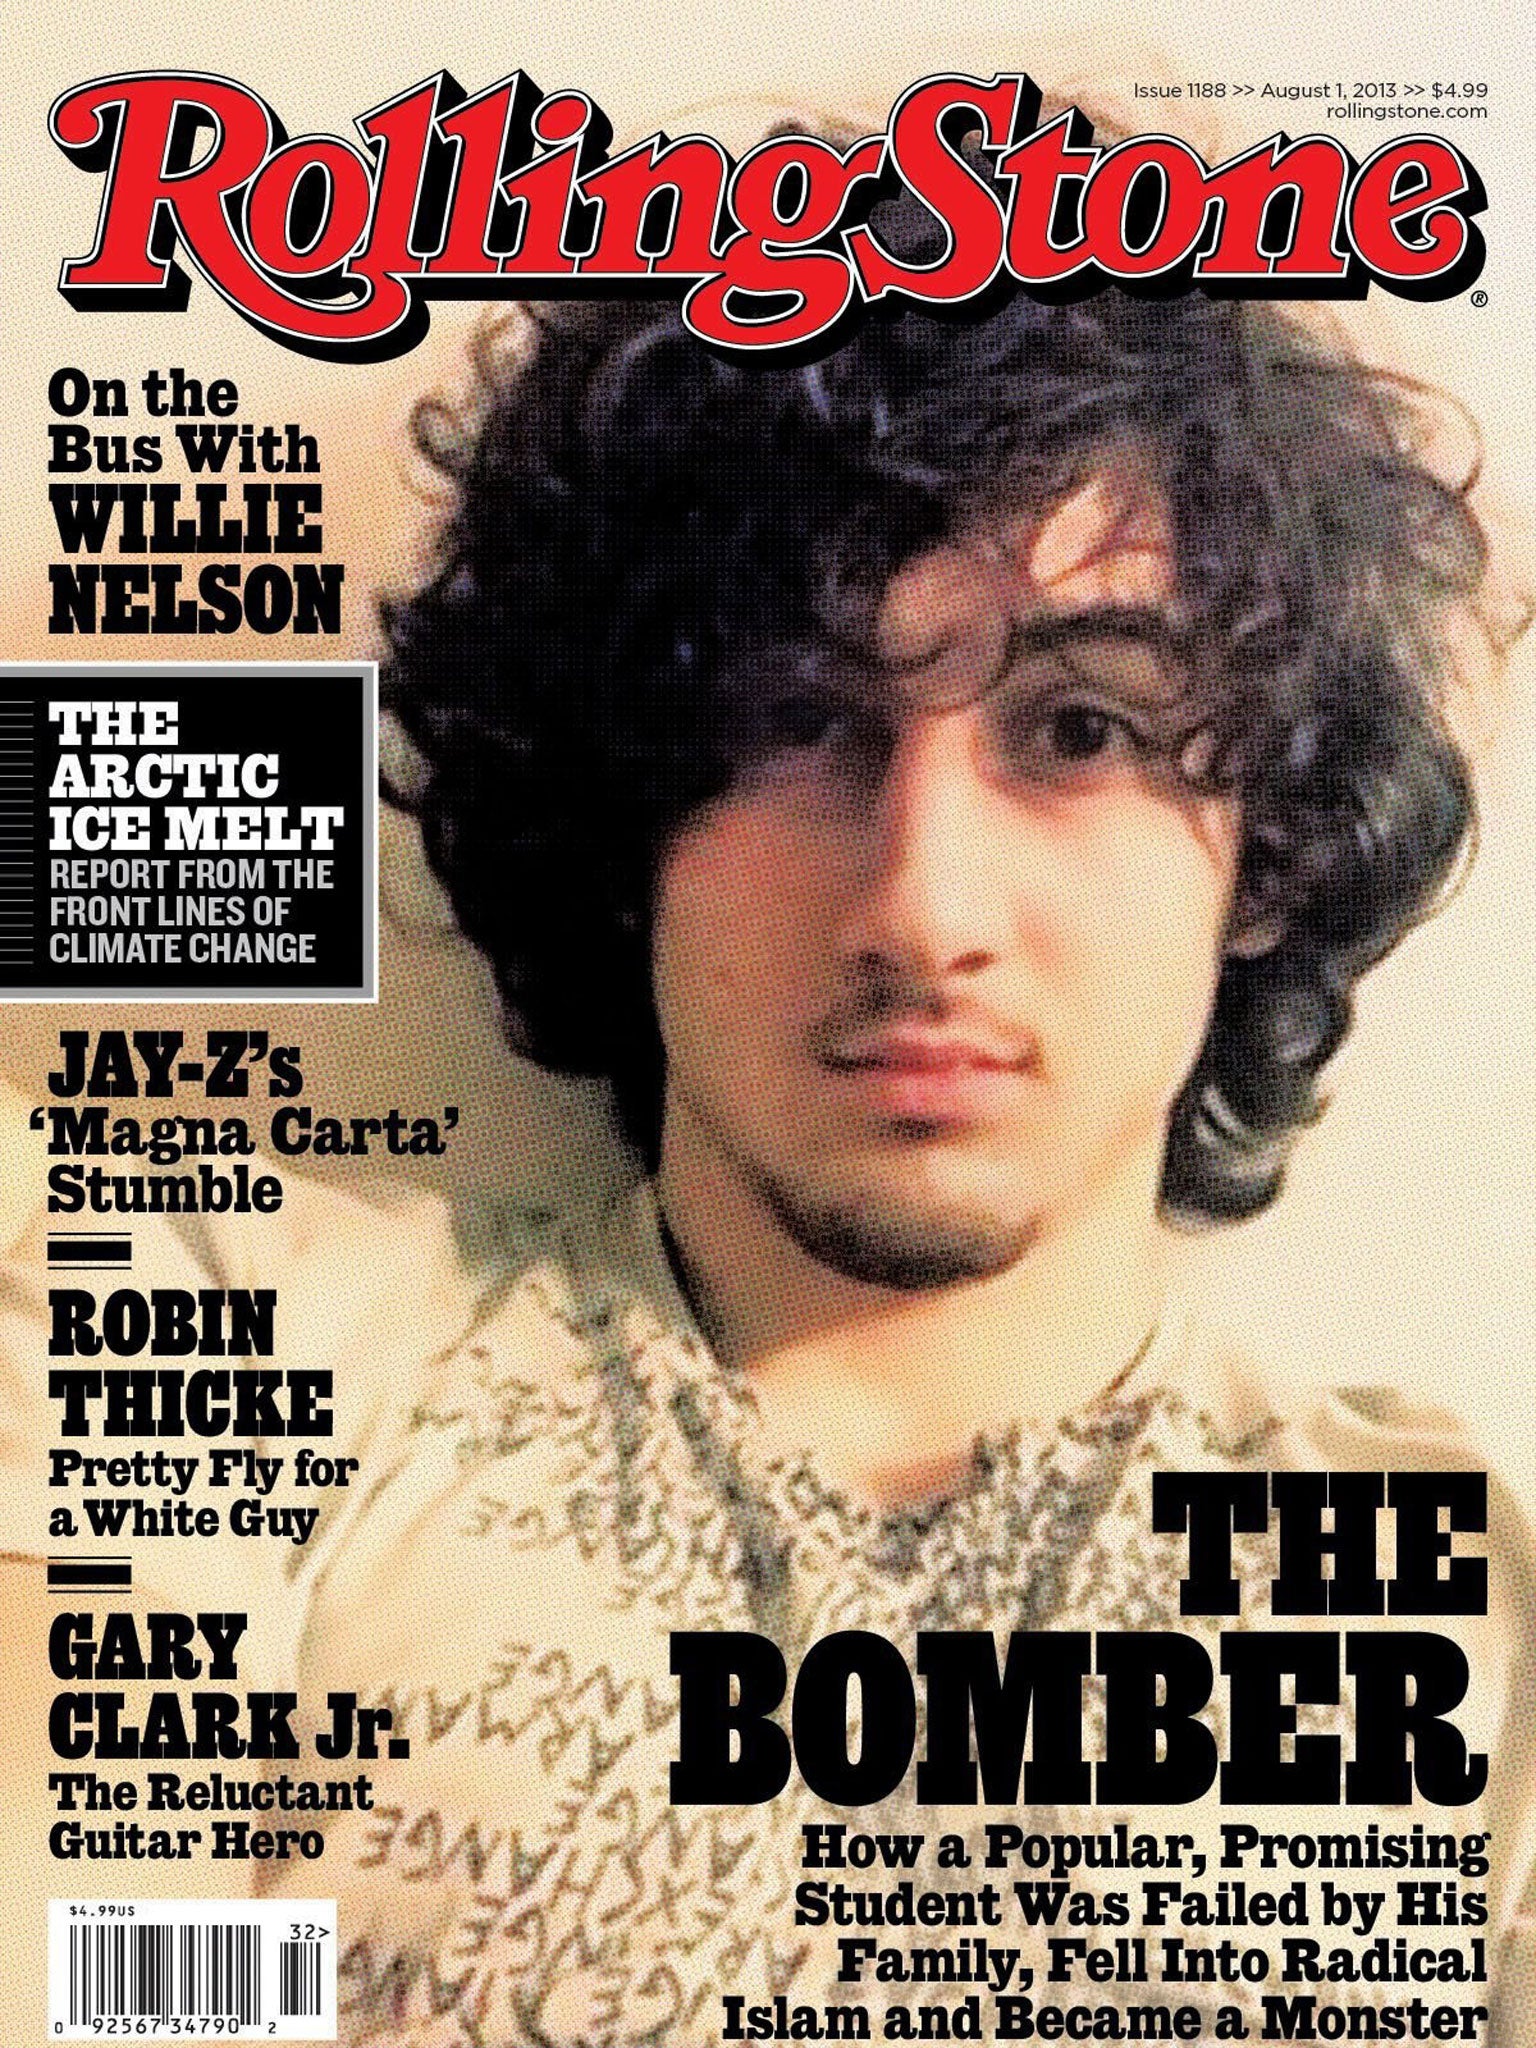 The cover of Rolling Stone